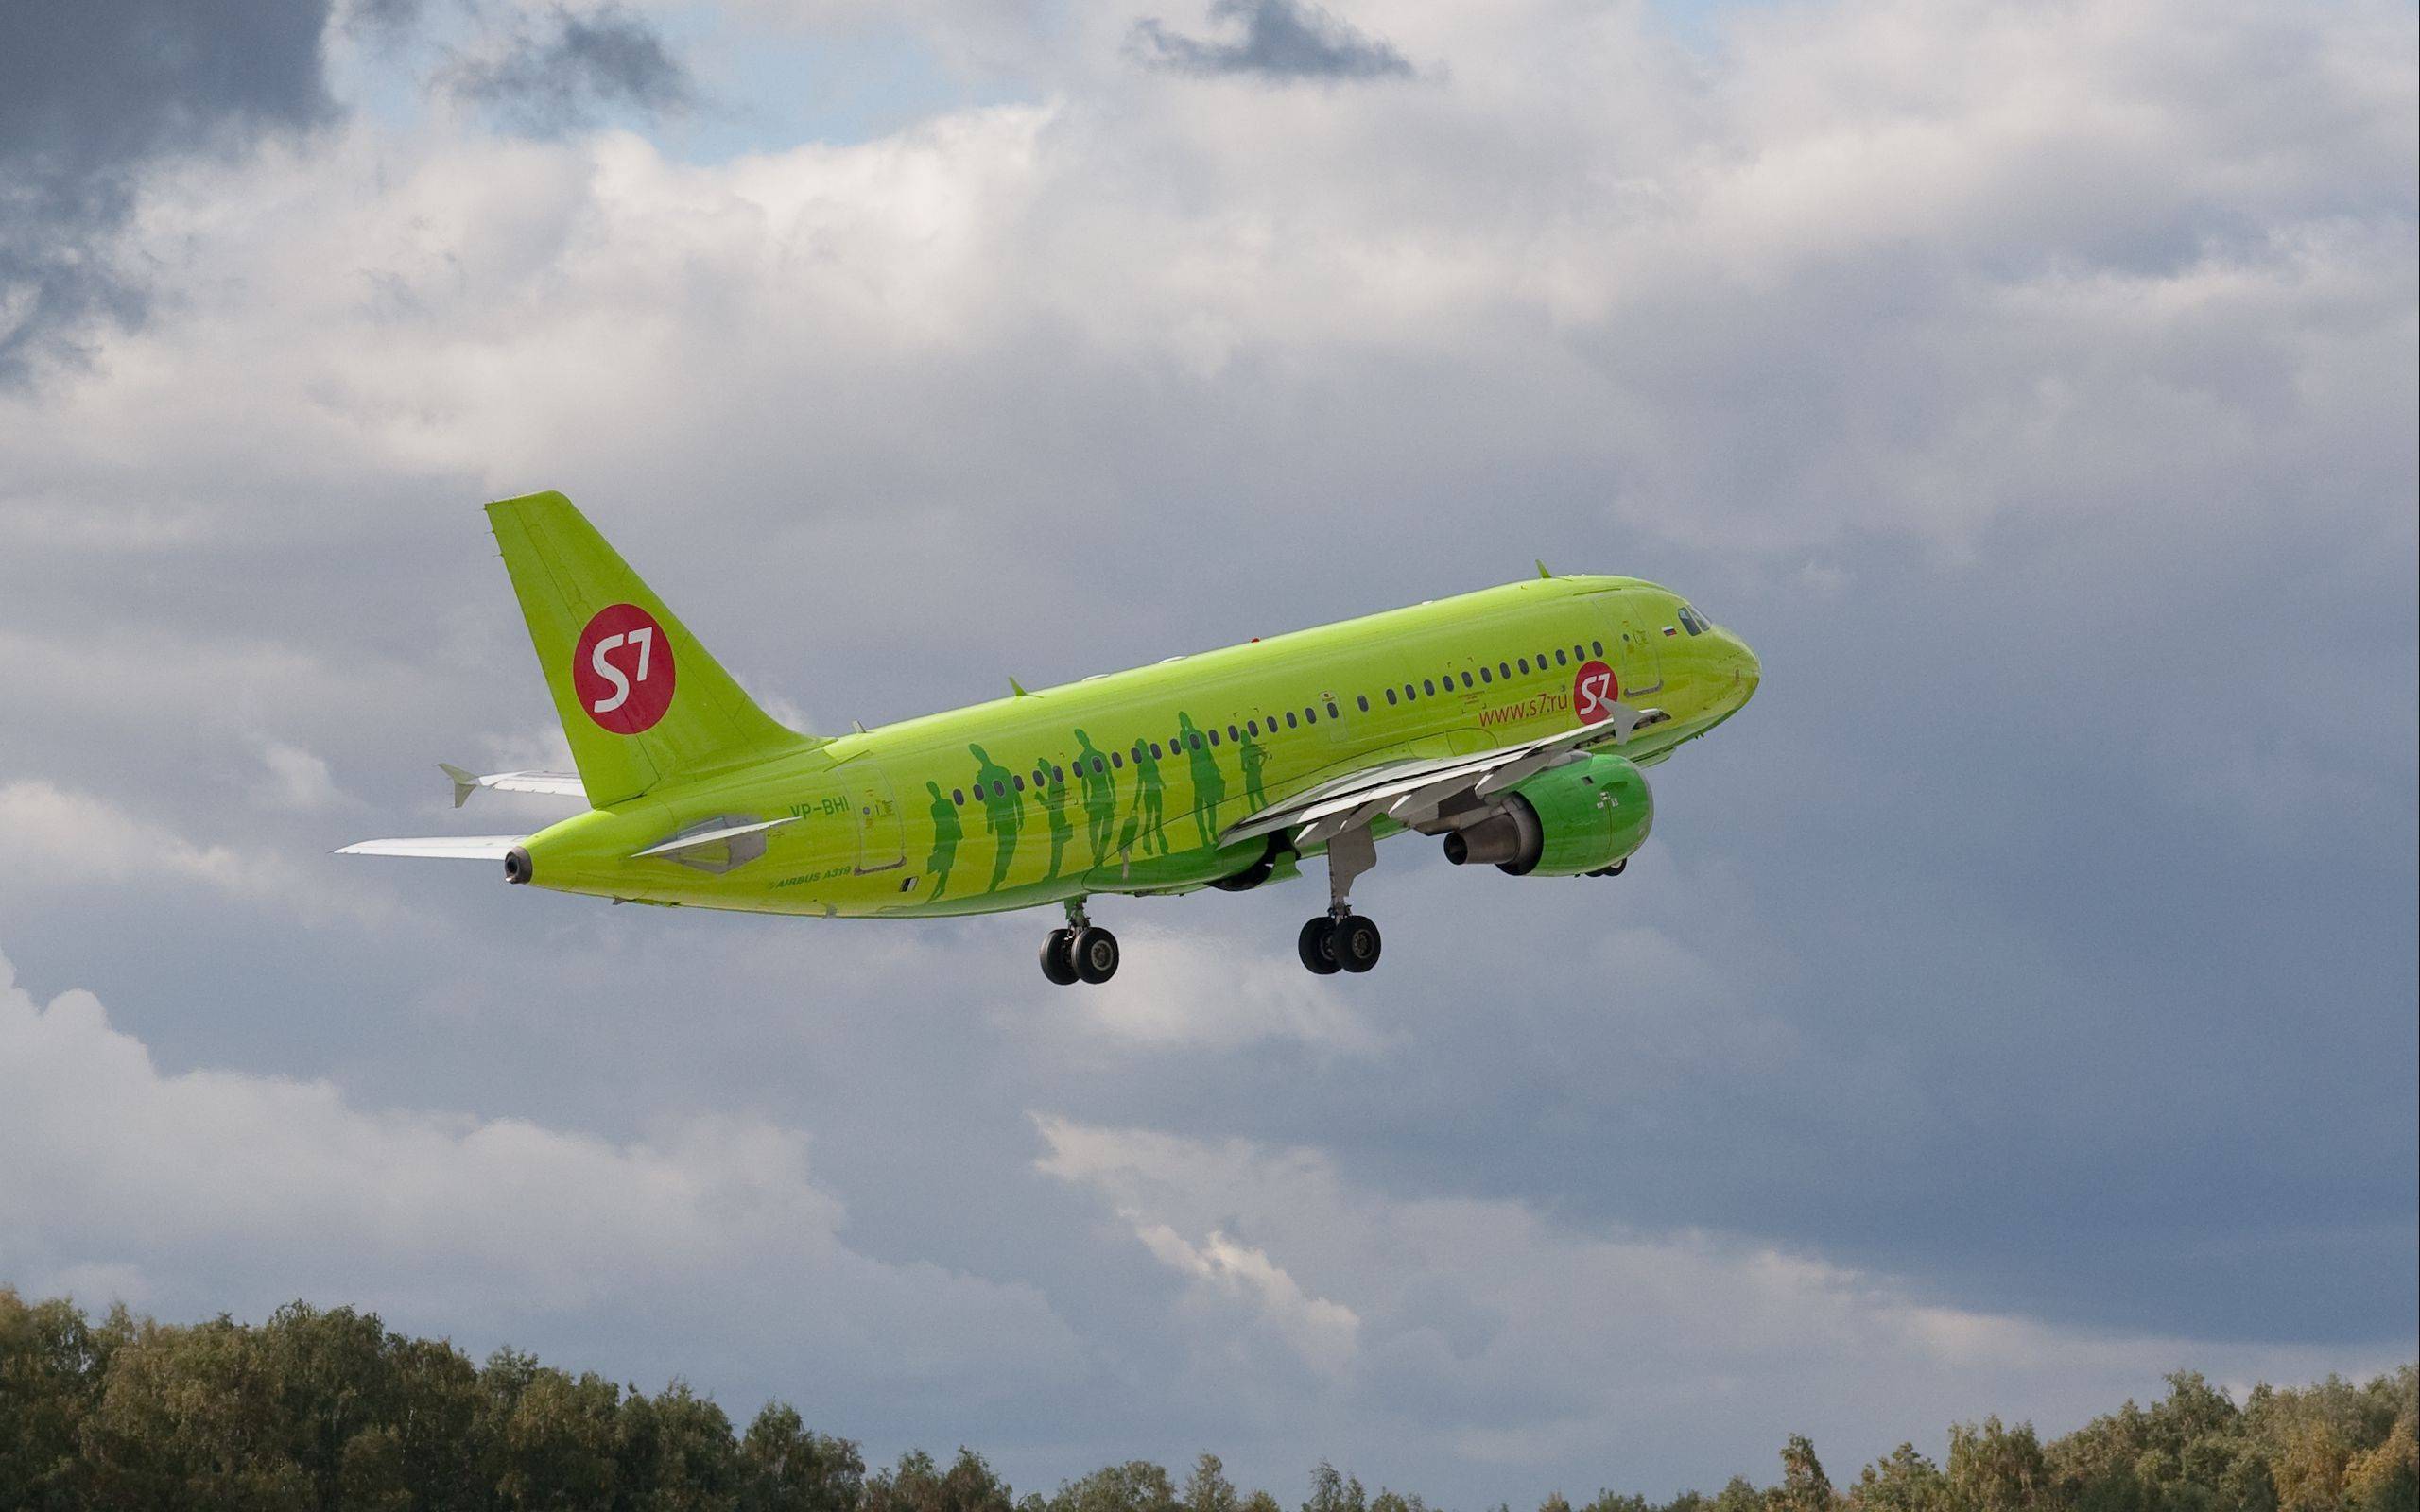 S7 airlines ручная. Самолёты авиакомпании s7 Airlines. Airbus a330 s7. Boeing 777 s7. Boeing 757 s7.